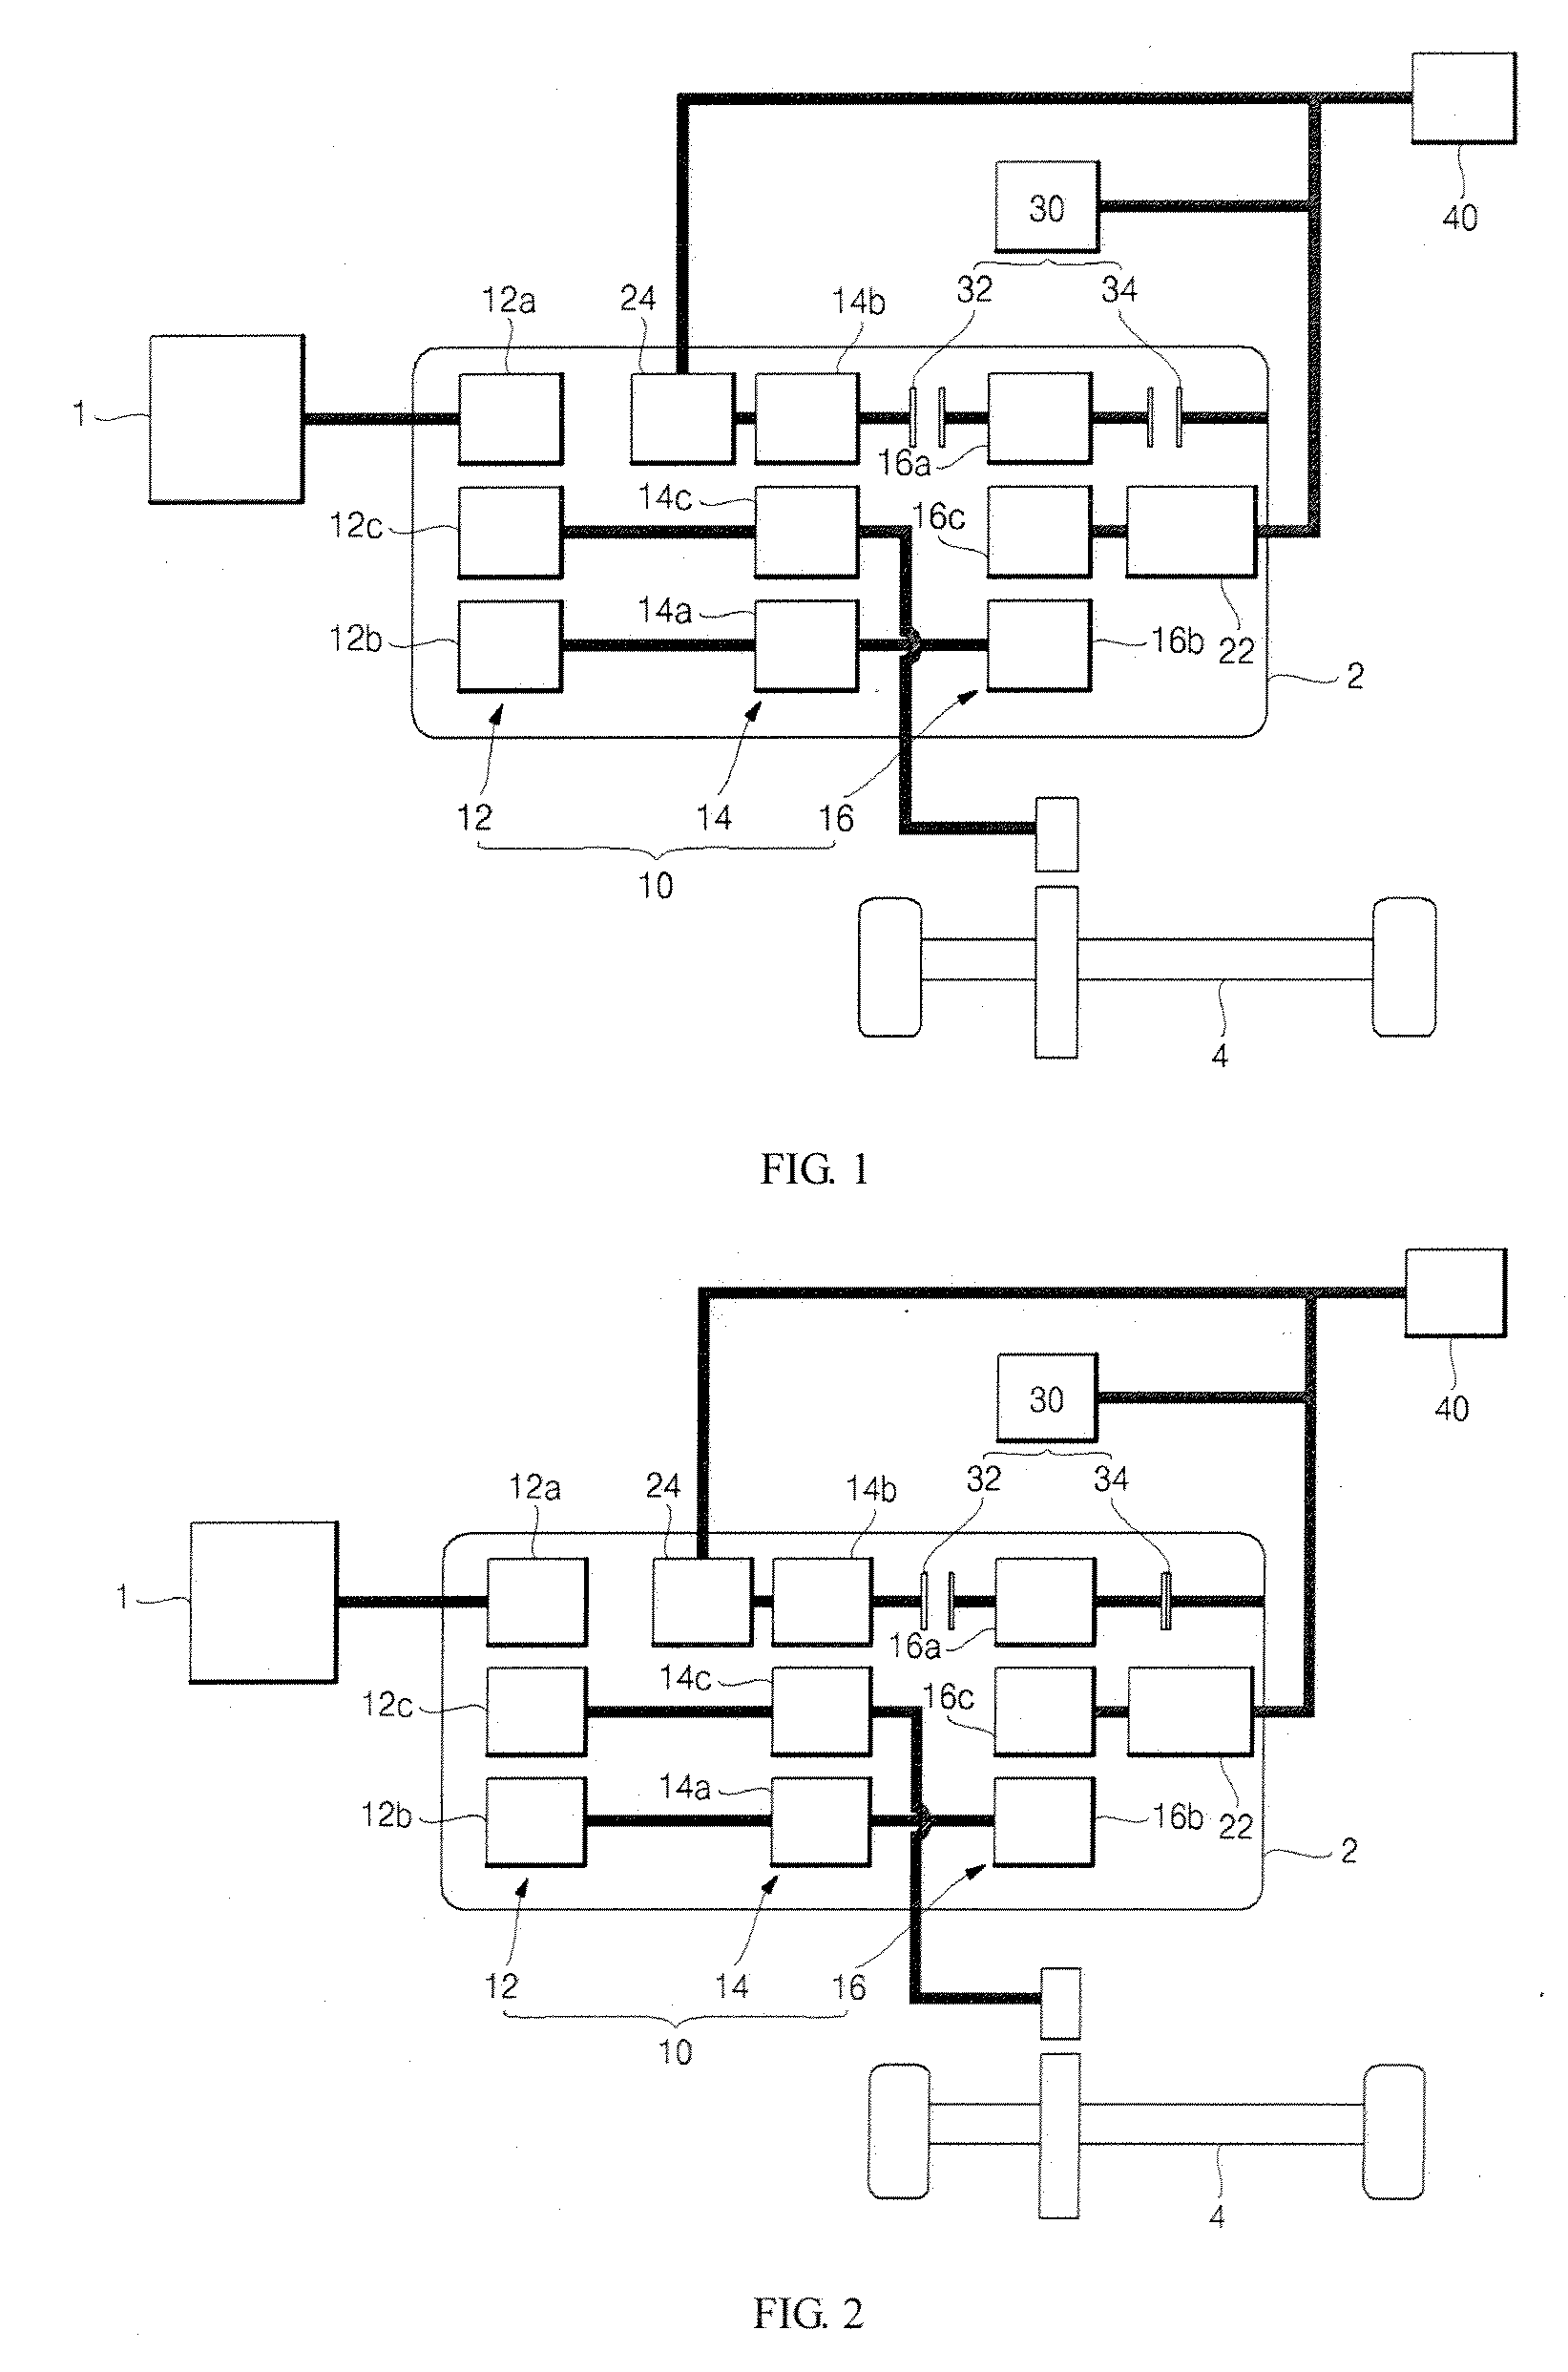 Power delivery system of hybrid vehicle